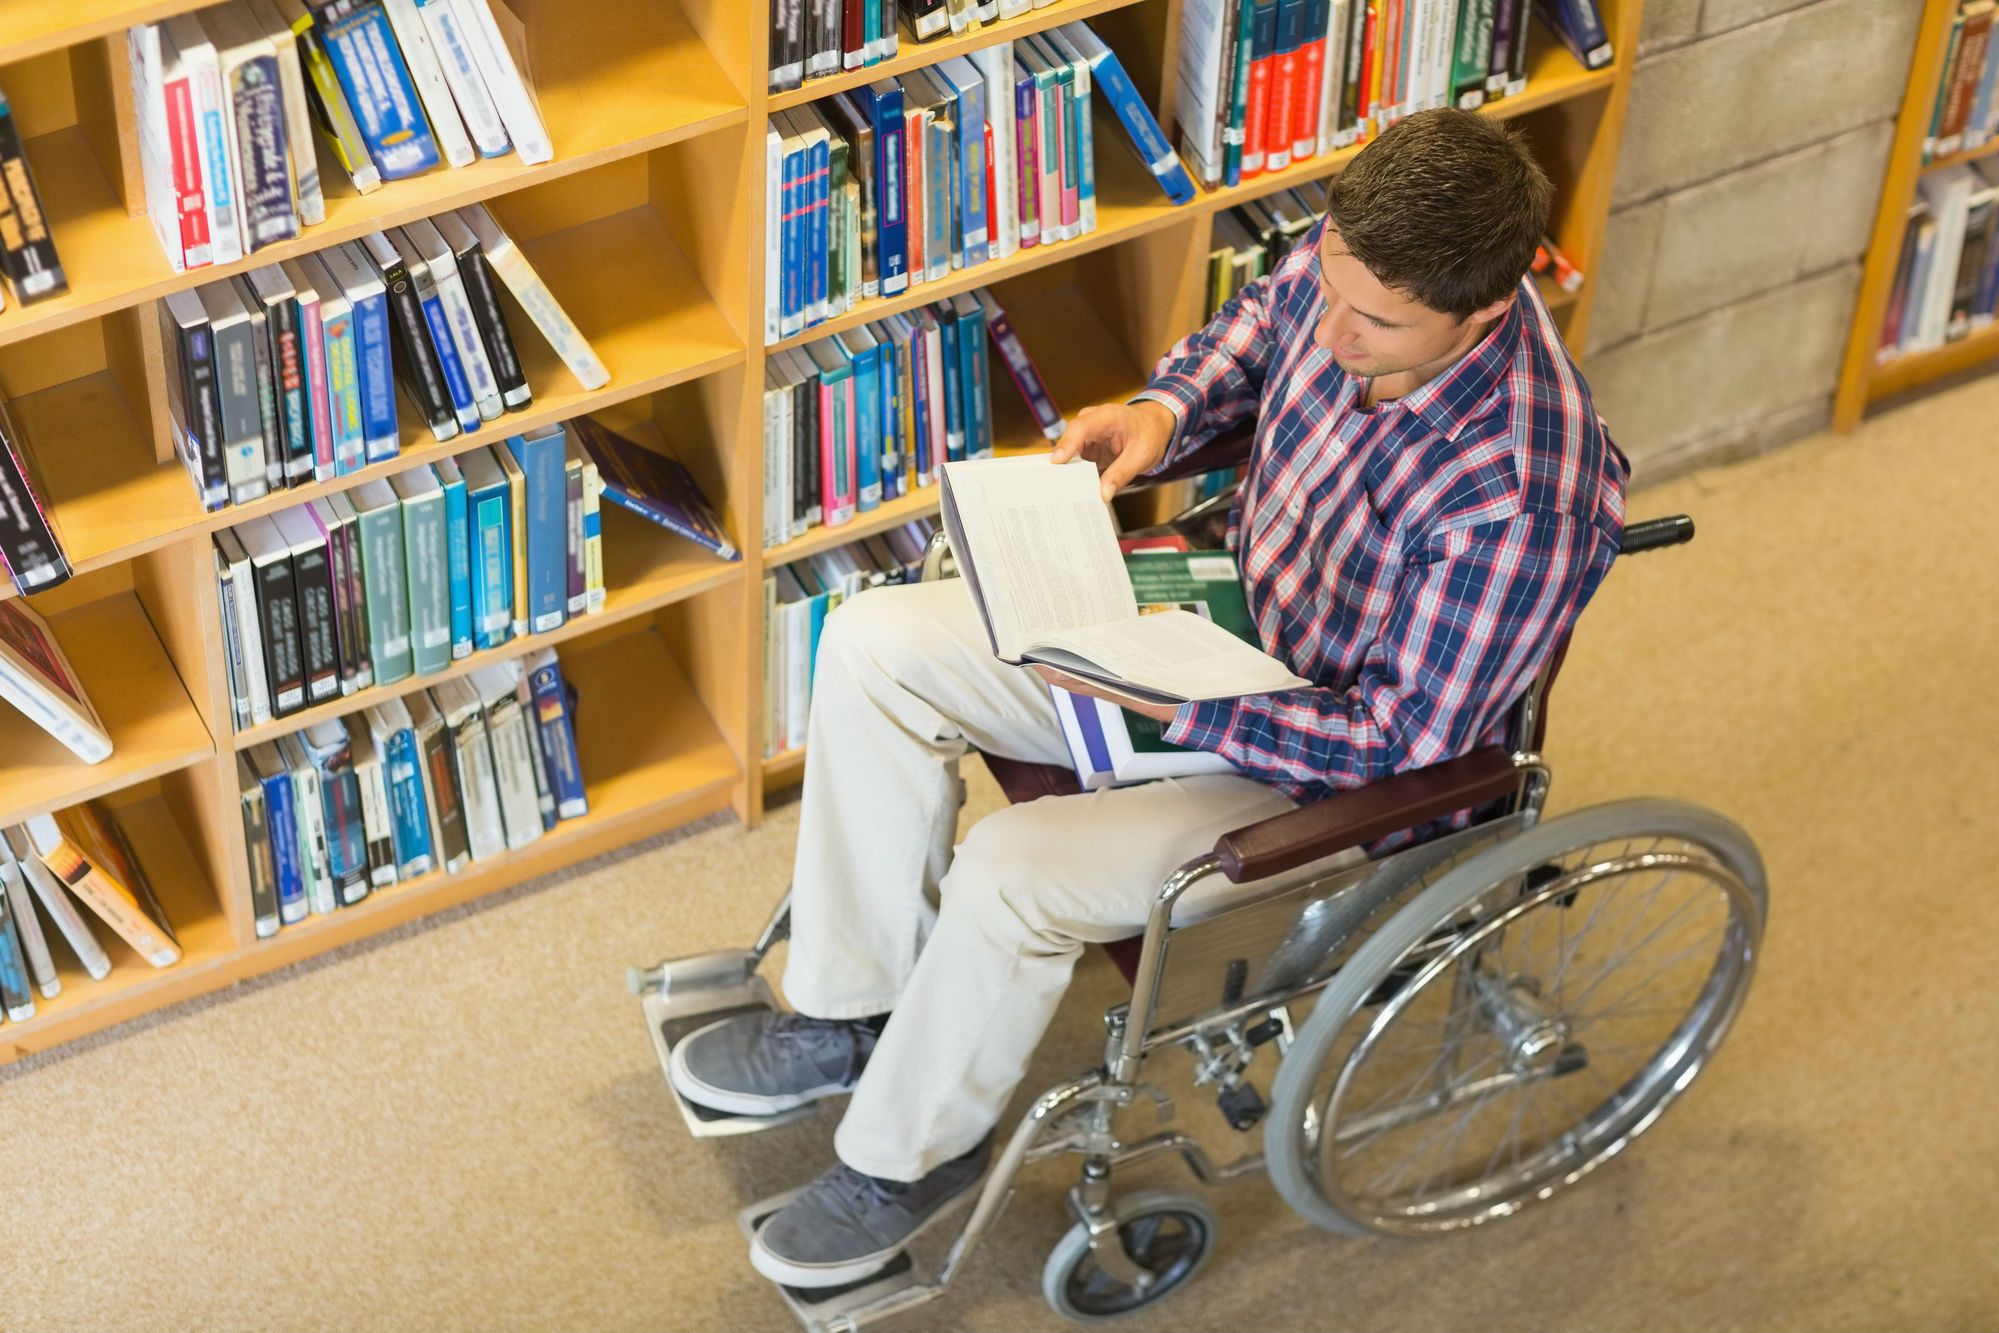 A man in a wheelchair reads a book in a library.